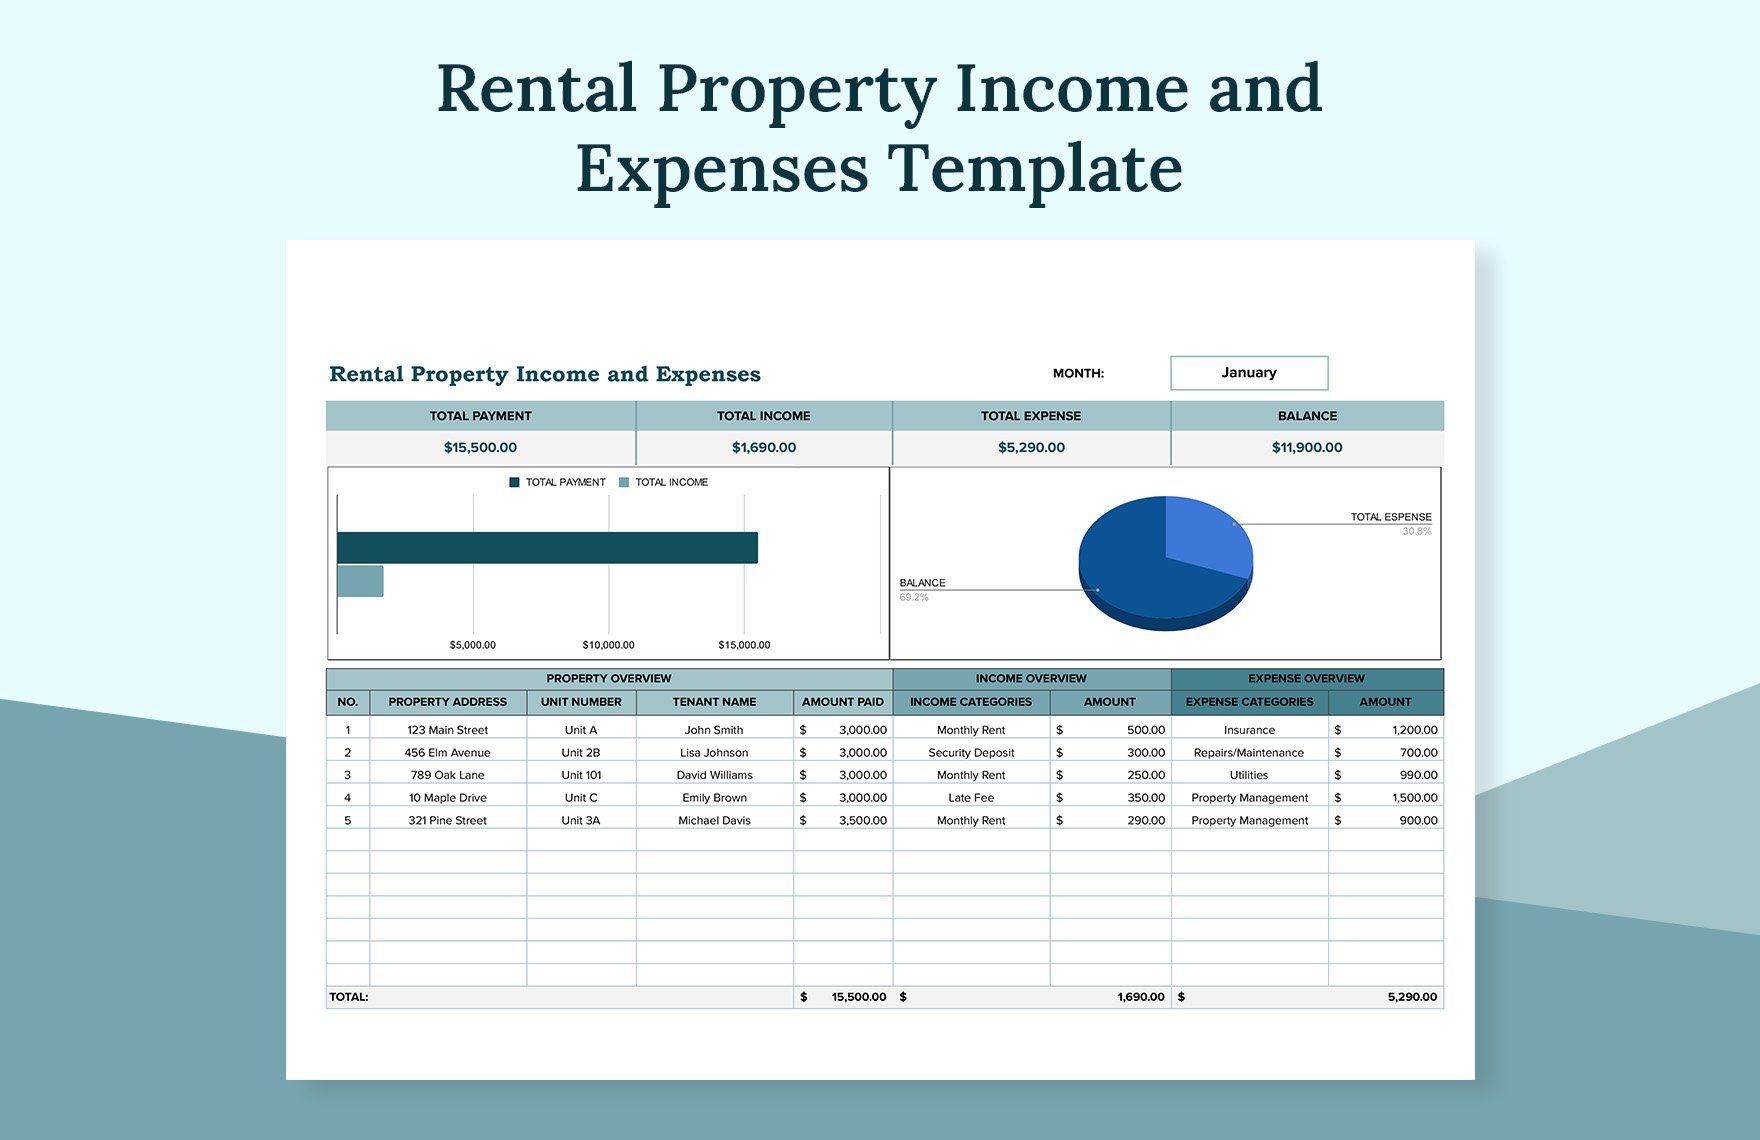 Rental Property Income and Expenses template